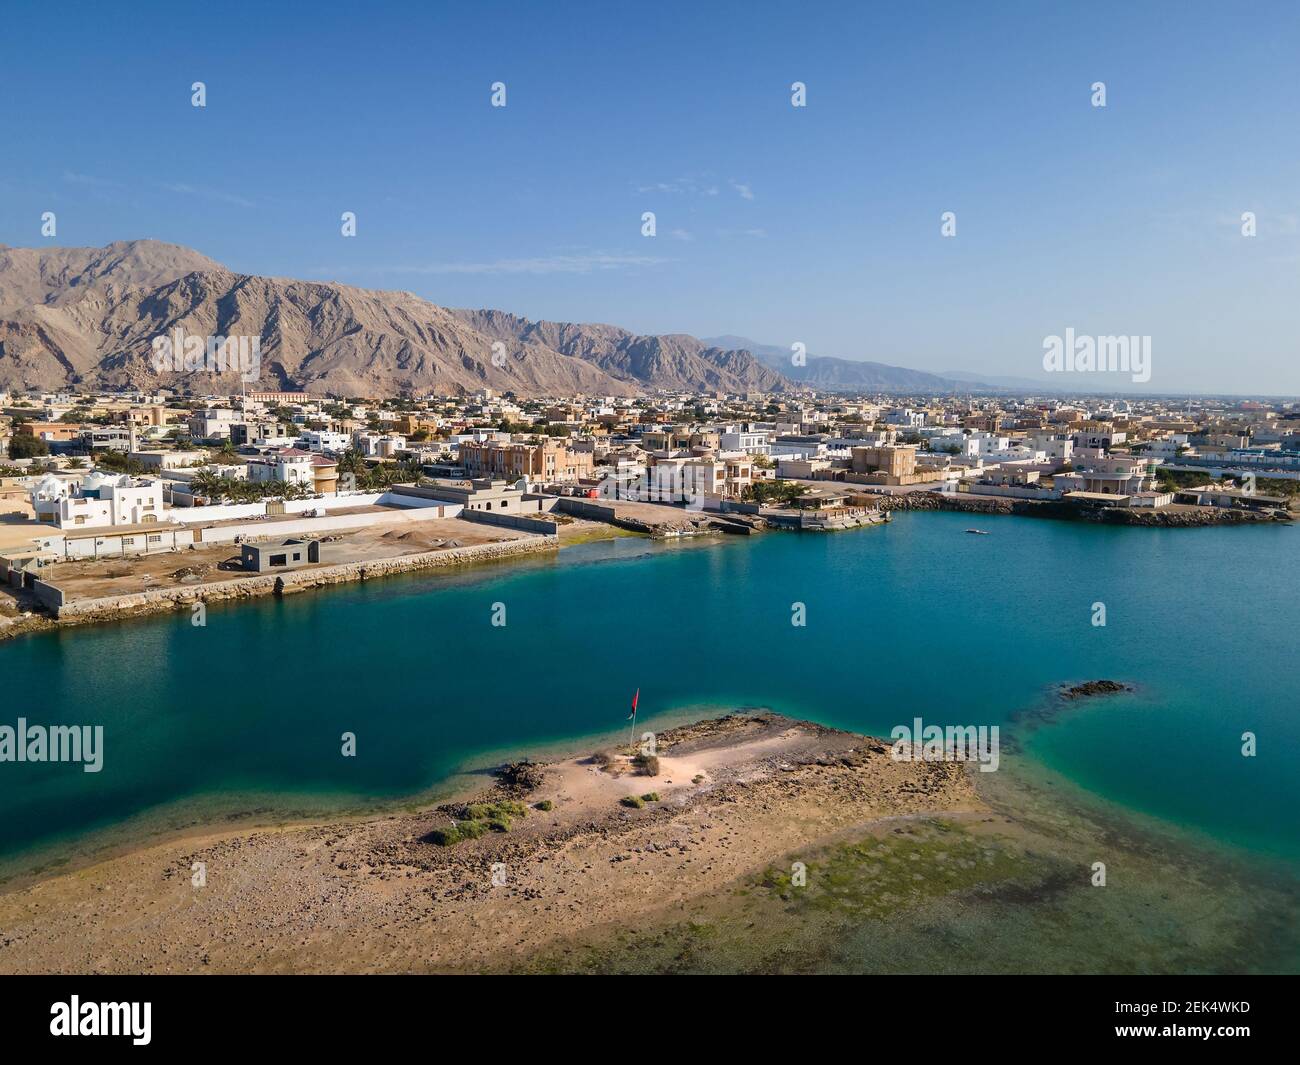 Al Rams county, the suburb of Ras Al Khaimah emirate in the United Arab Emirates settling bellow the sandstone mountains by the seaside aerial view Stock Photo